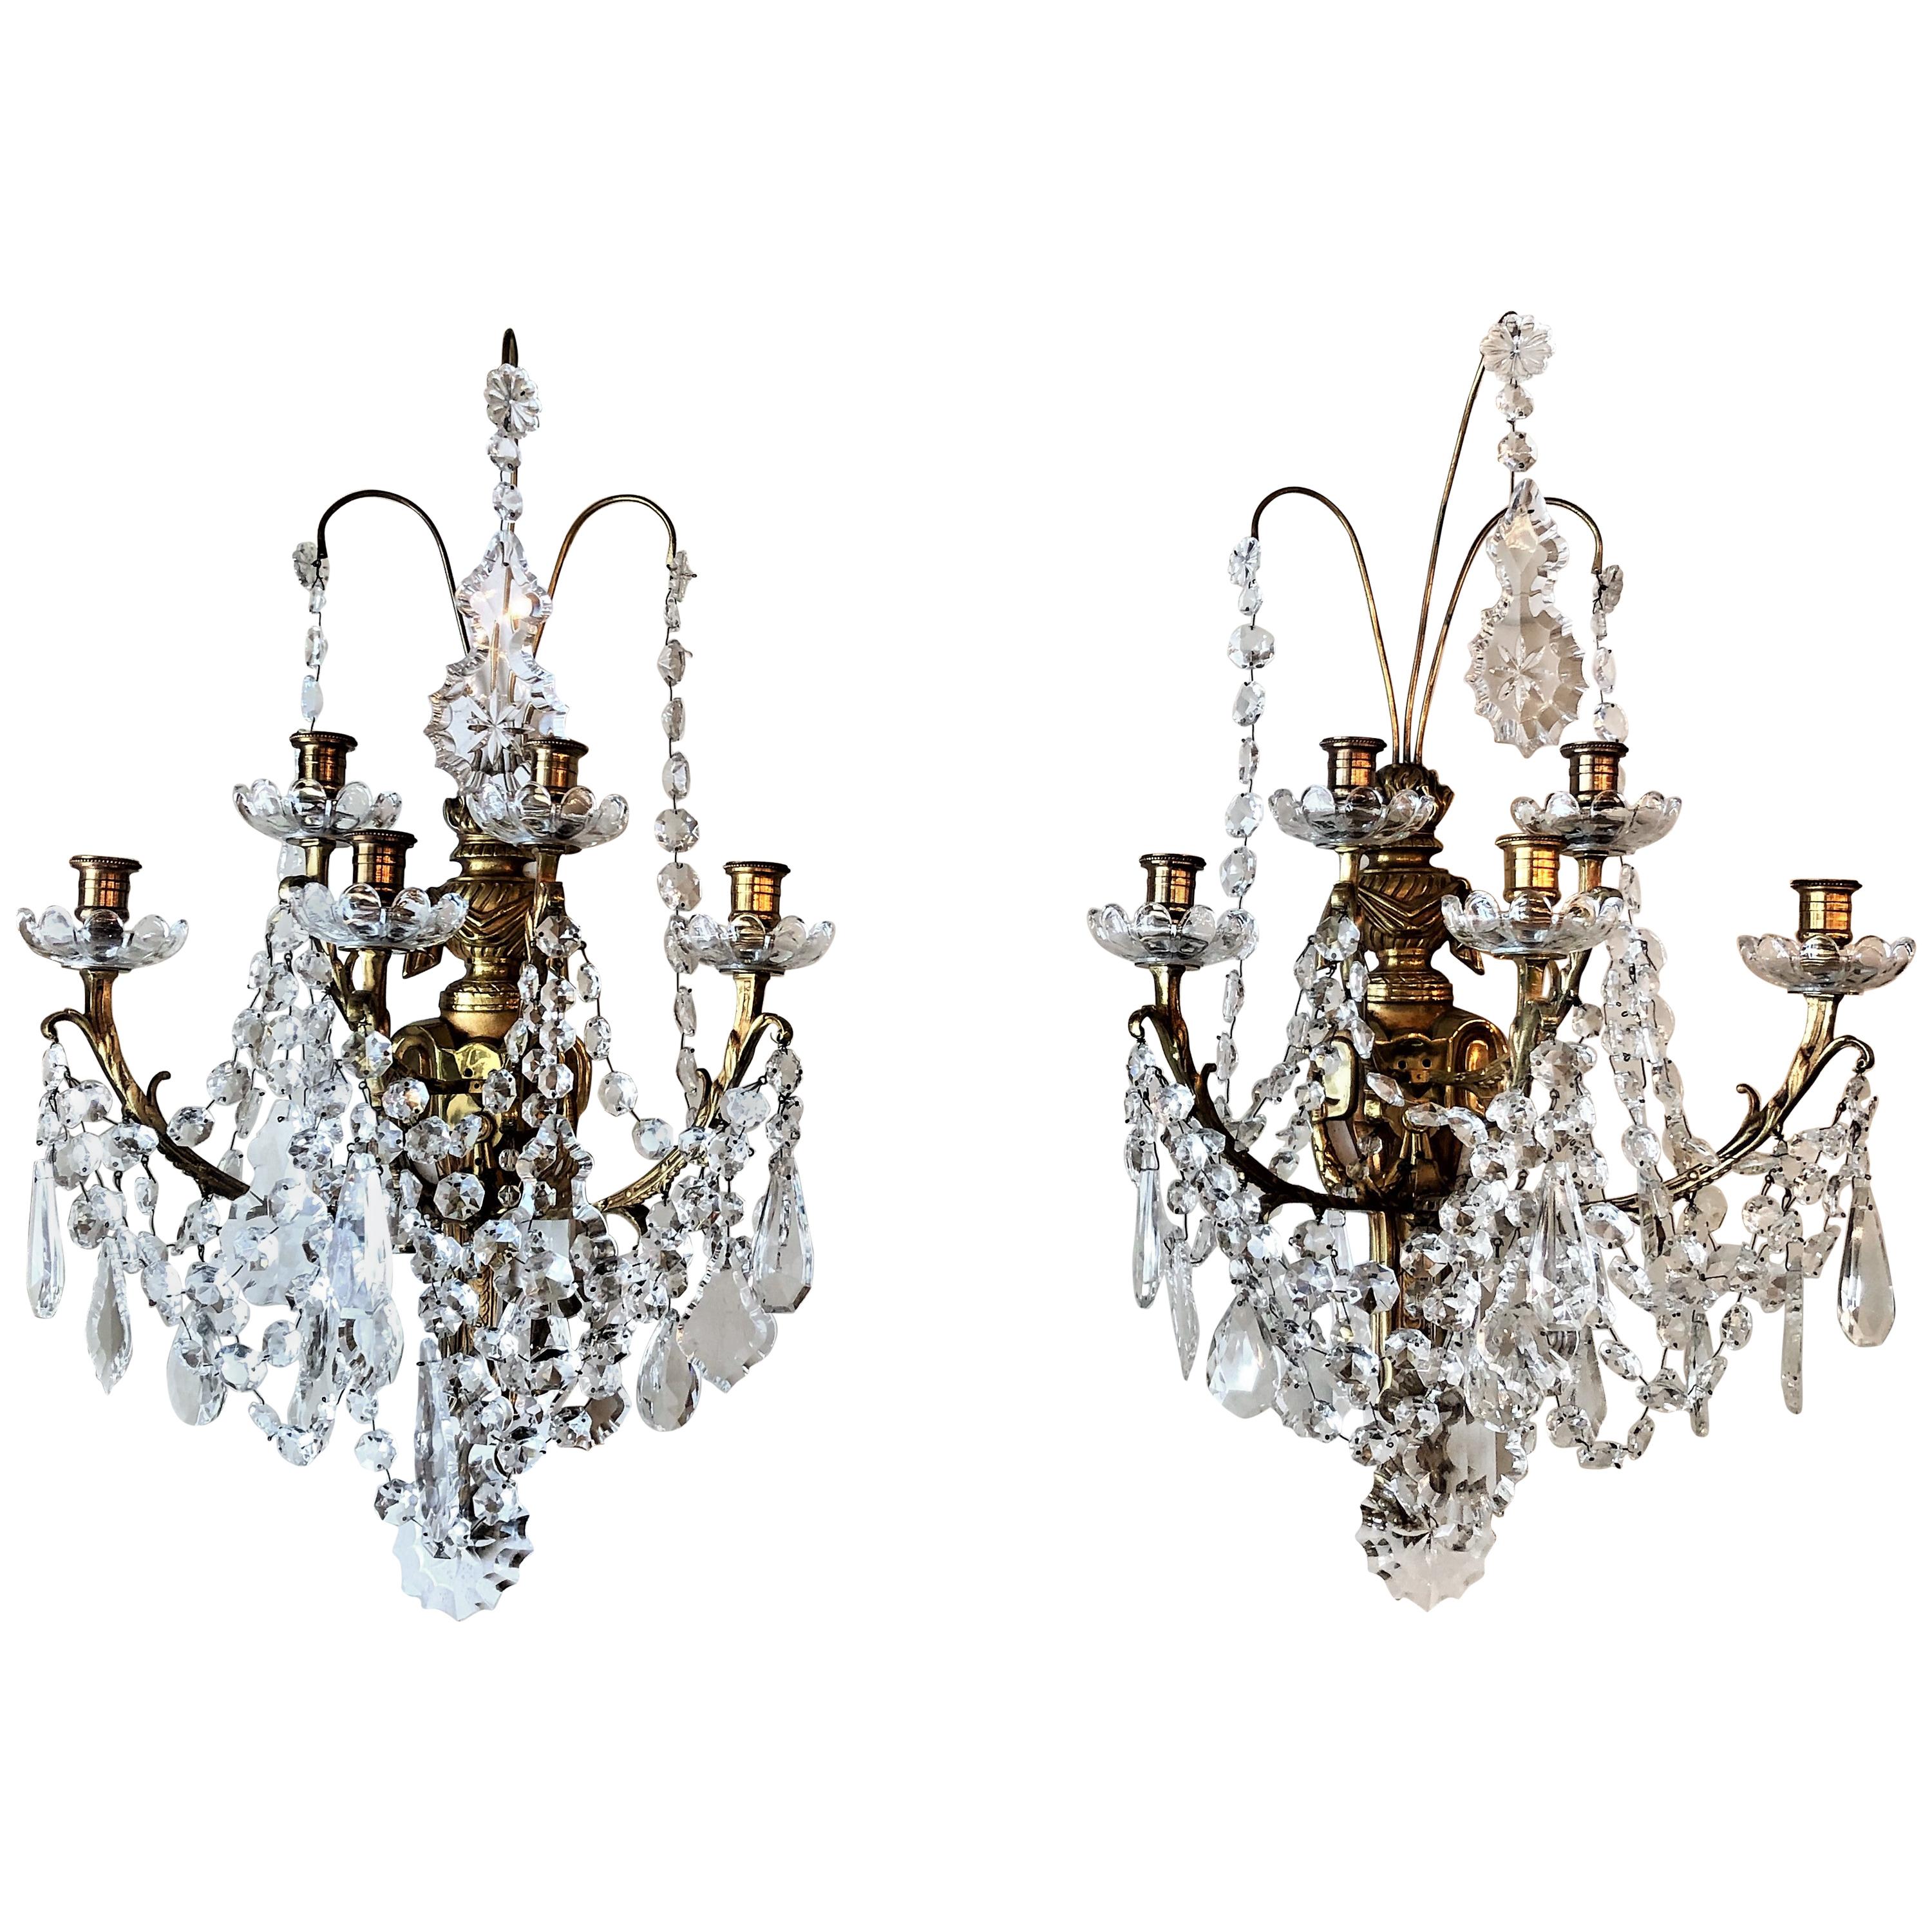 Pair of Grand Antique French Bronze Doré and Baccarat Crystal Sconces circa 1880